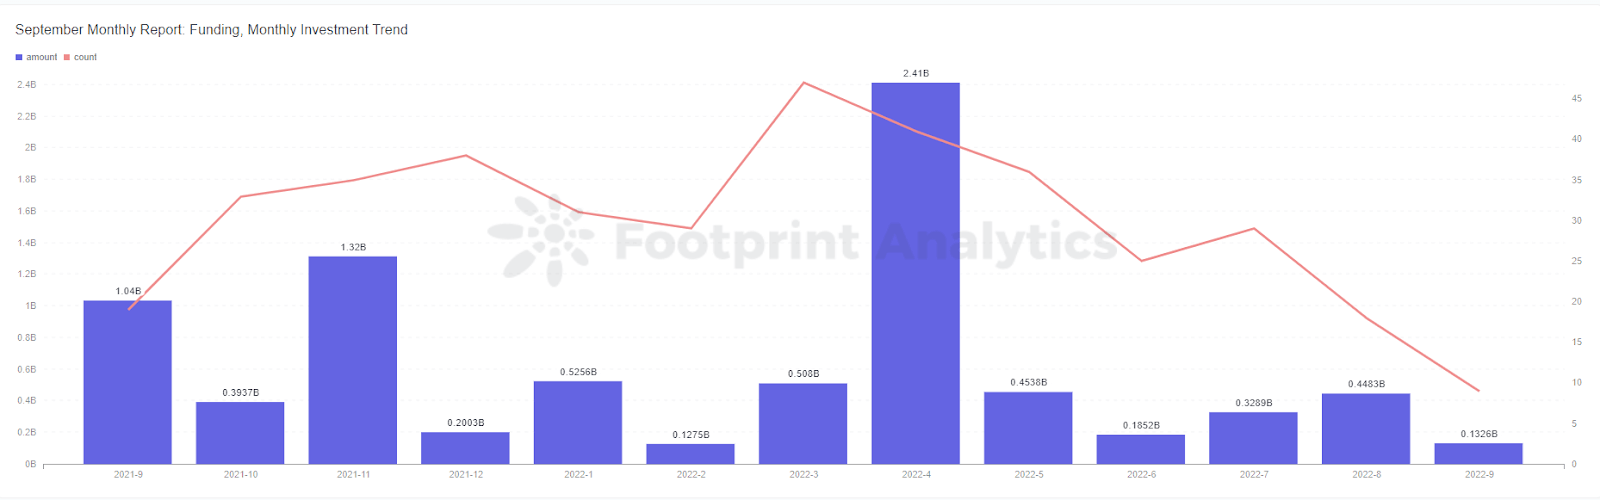 September Monthly Report: Funding, Monthly Investment